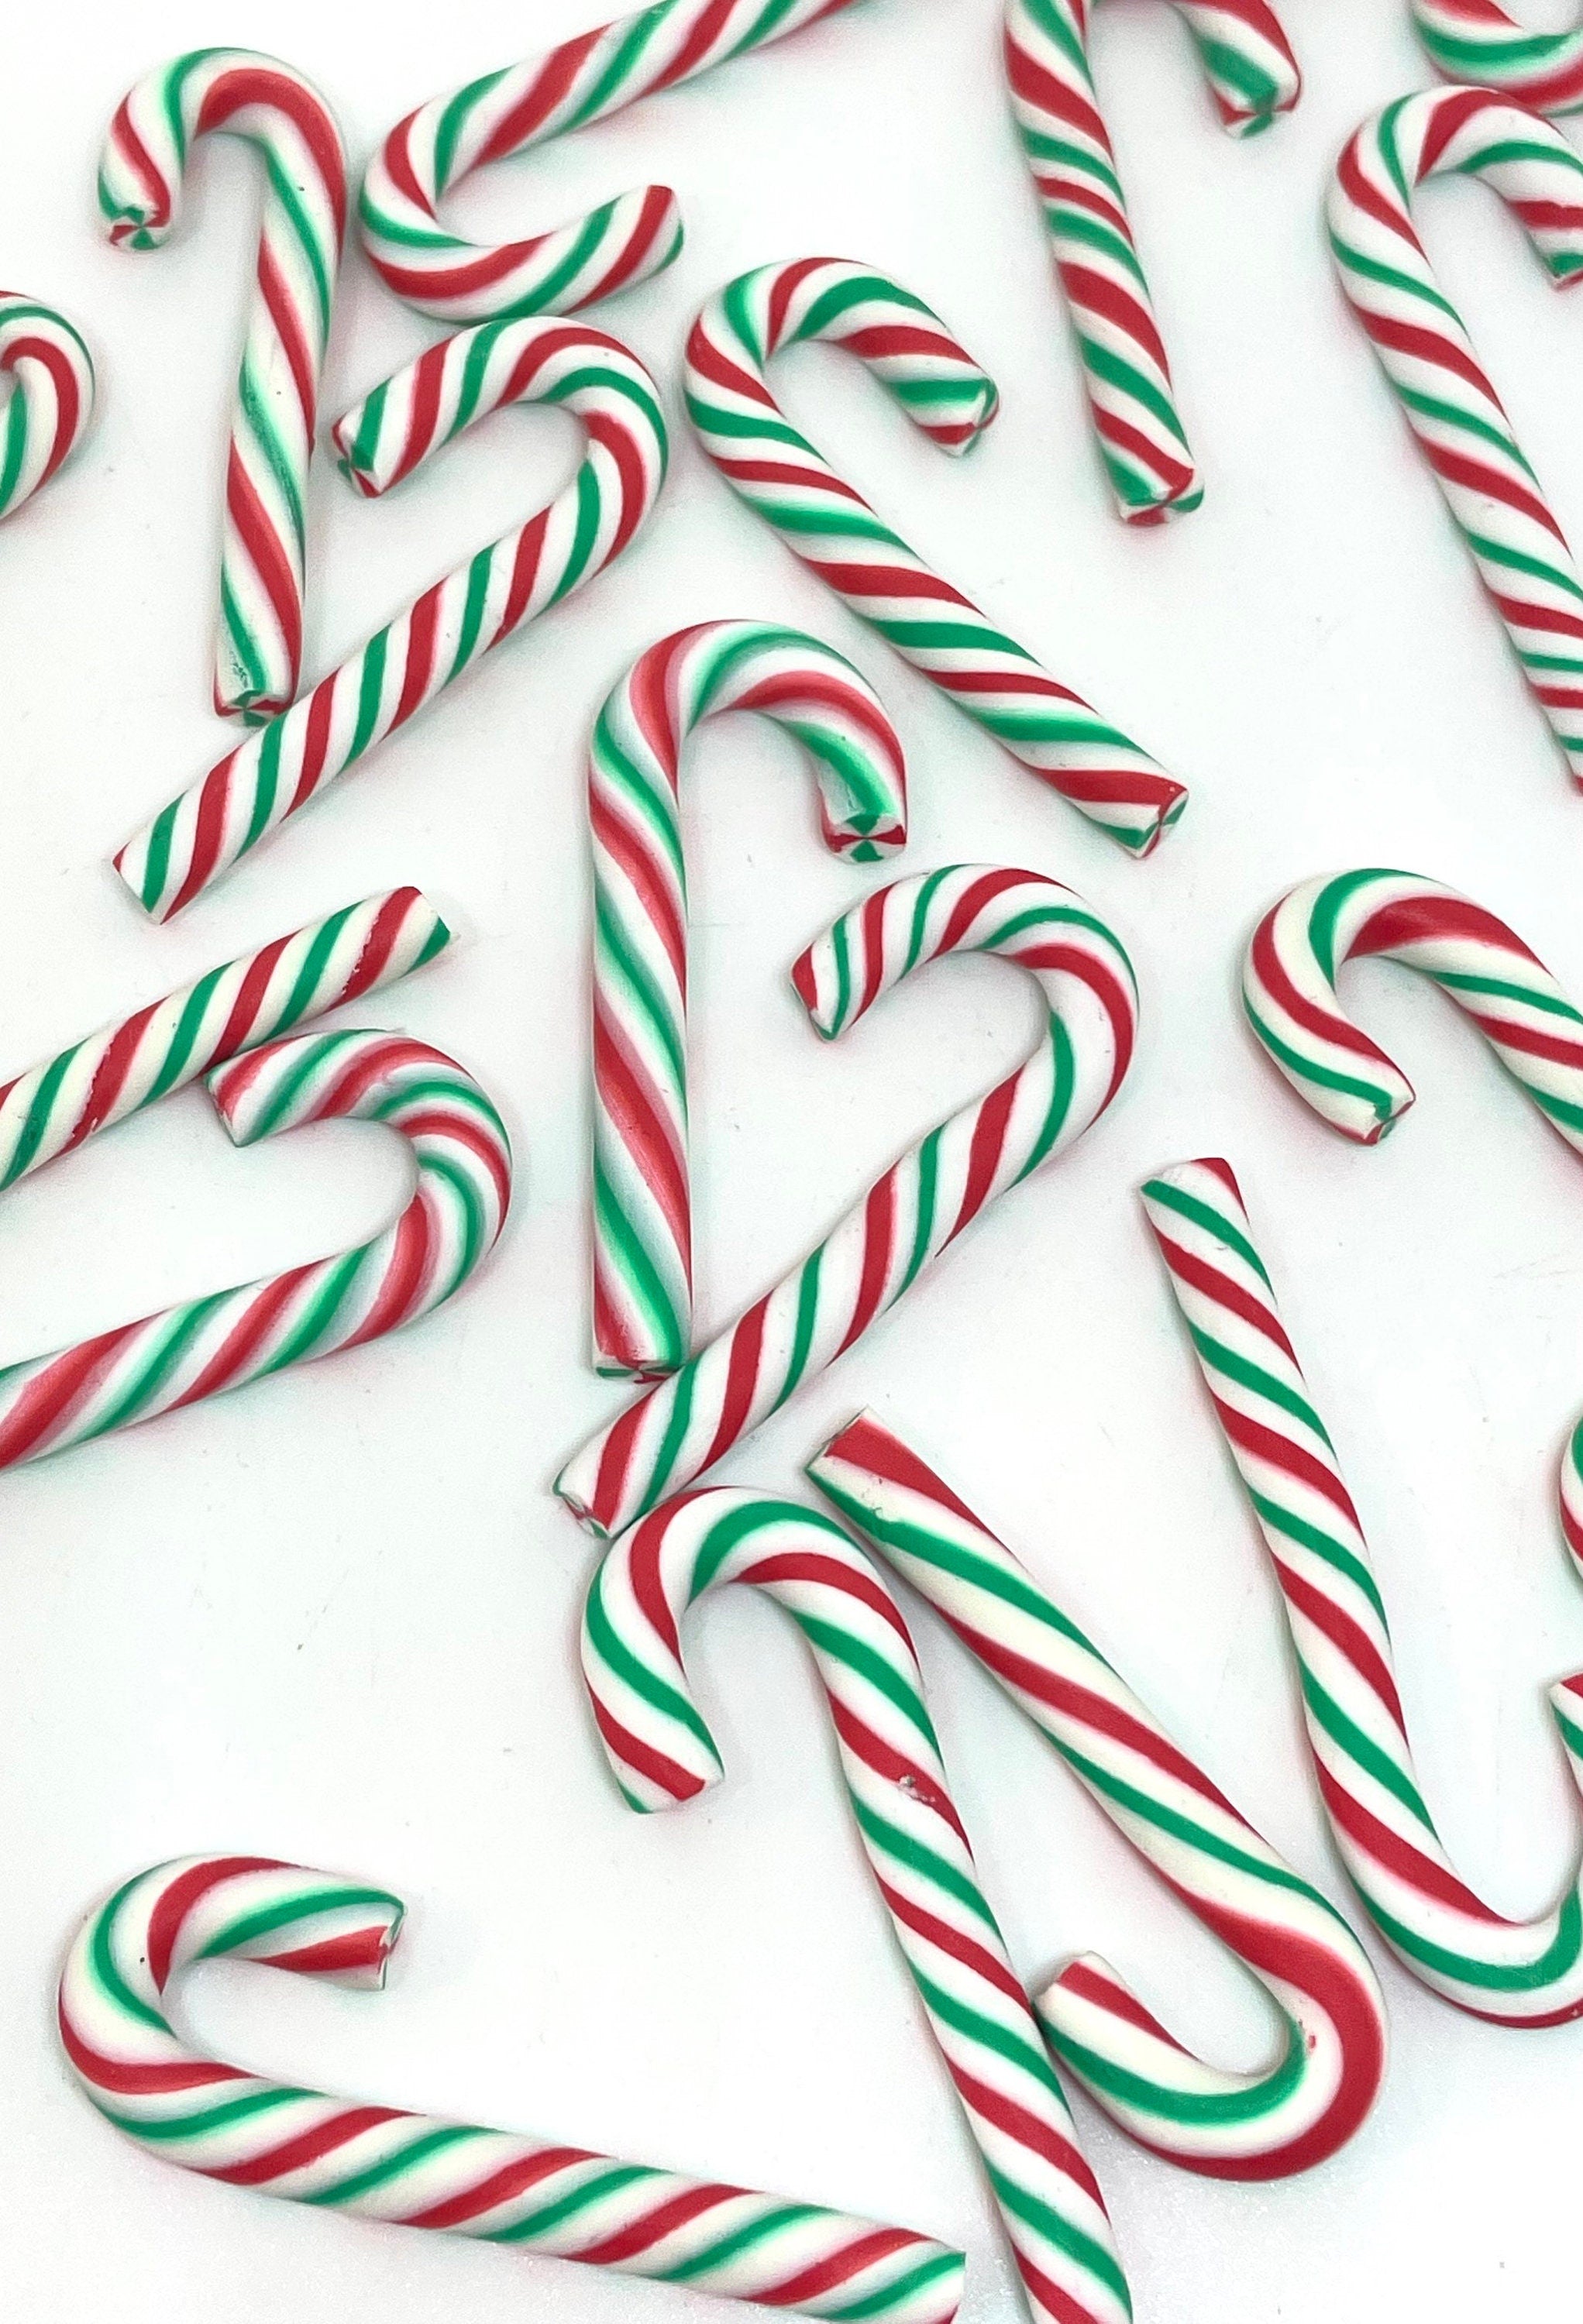 Cute Fake Candy Cane Christmas Decorations for Ornaments, Slime, Holid